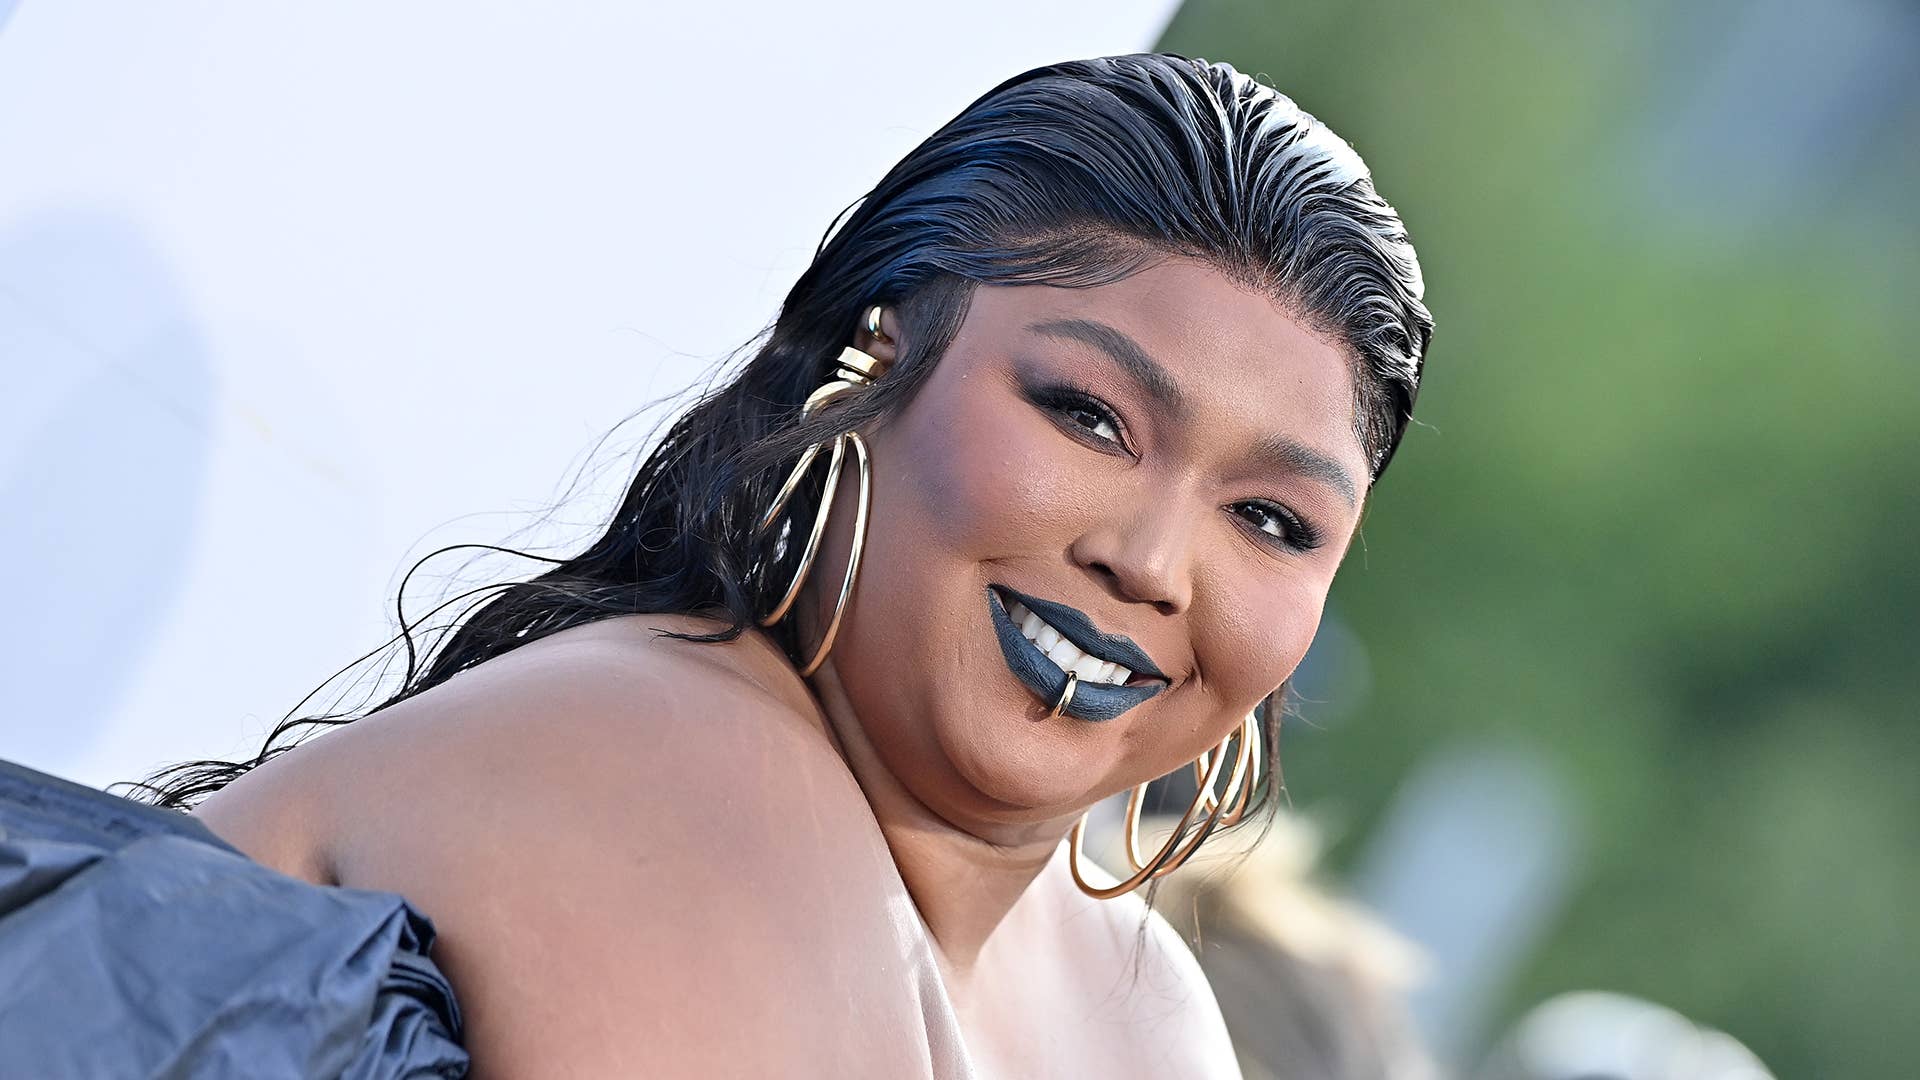 Lizzo attends the 2022 MTV Video Music Awards at Prudential Center on August 28, 2022